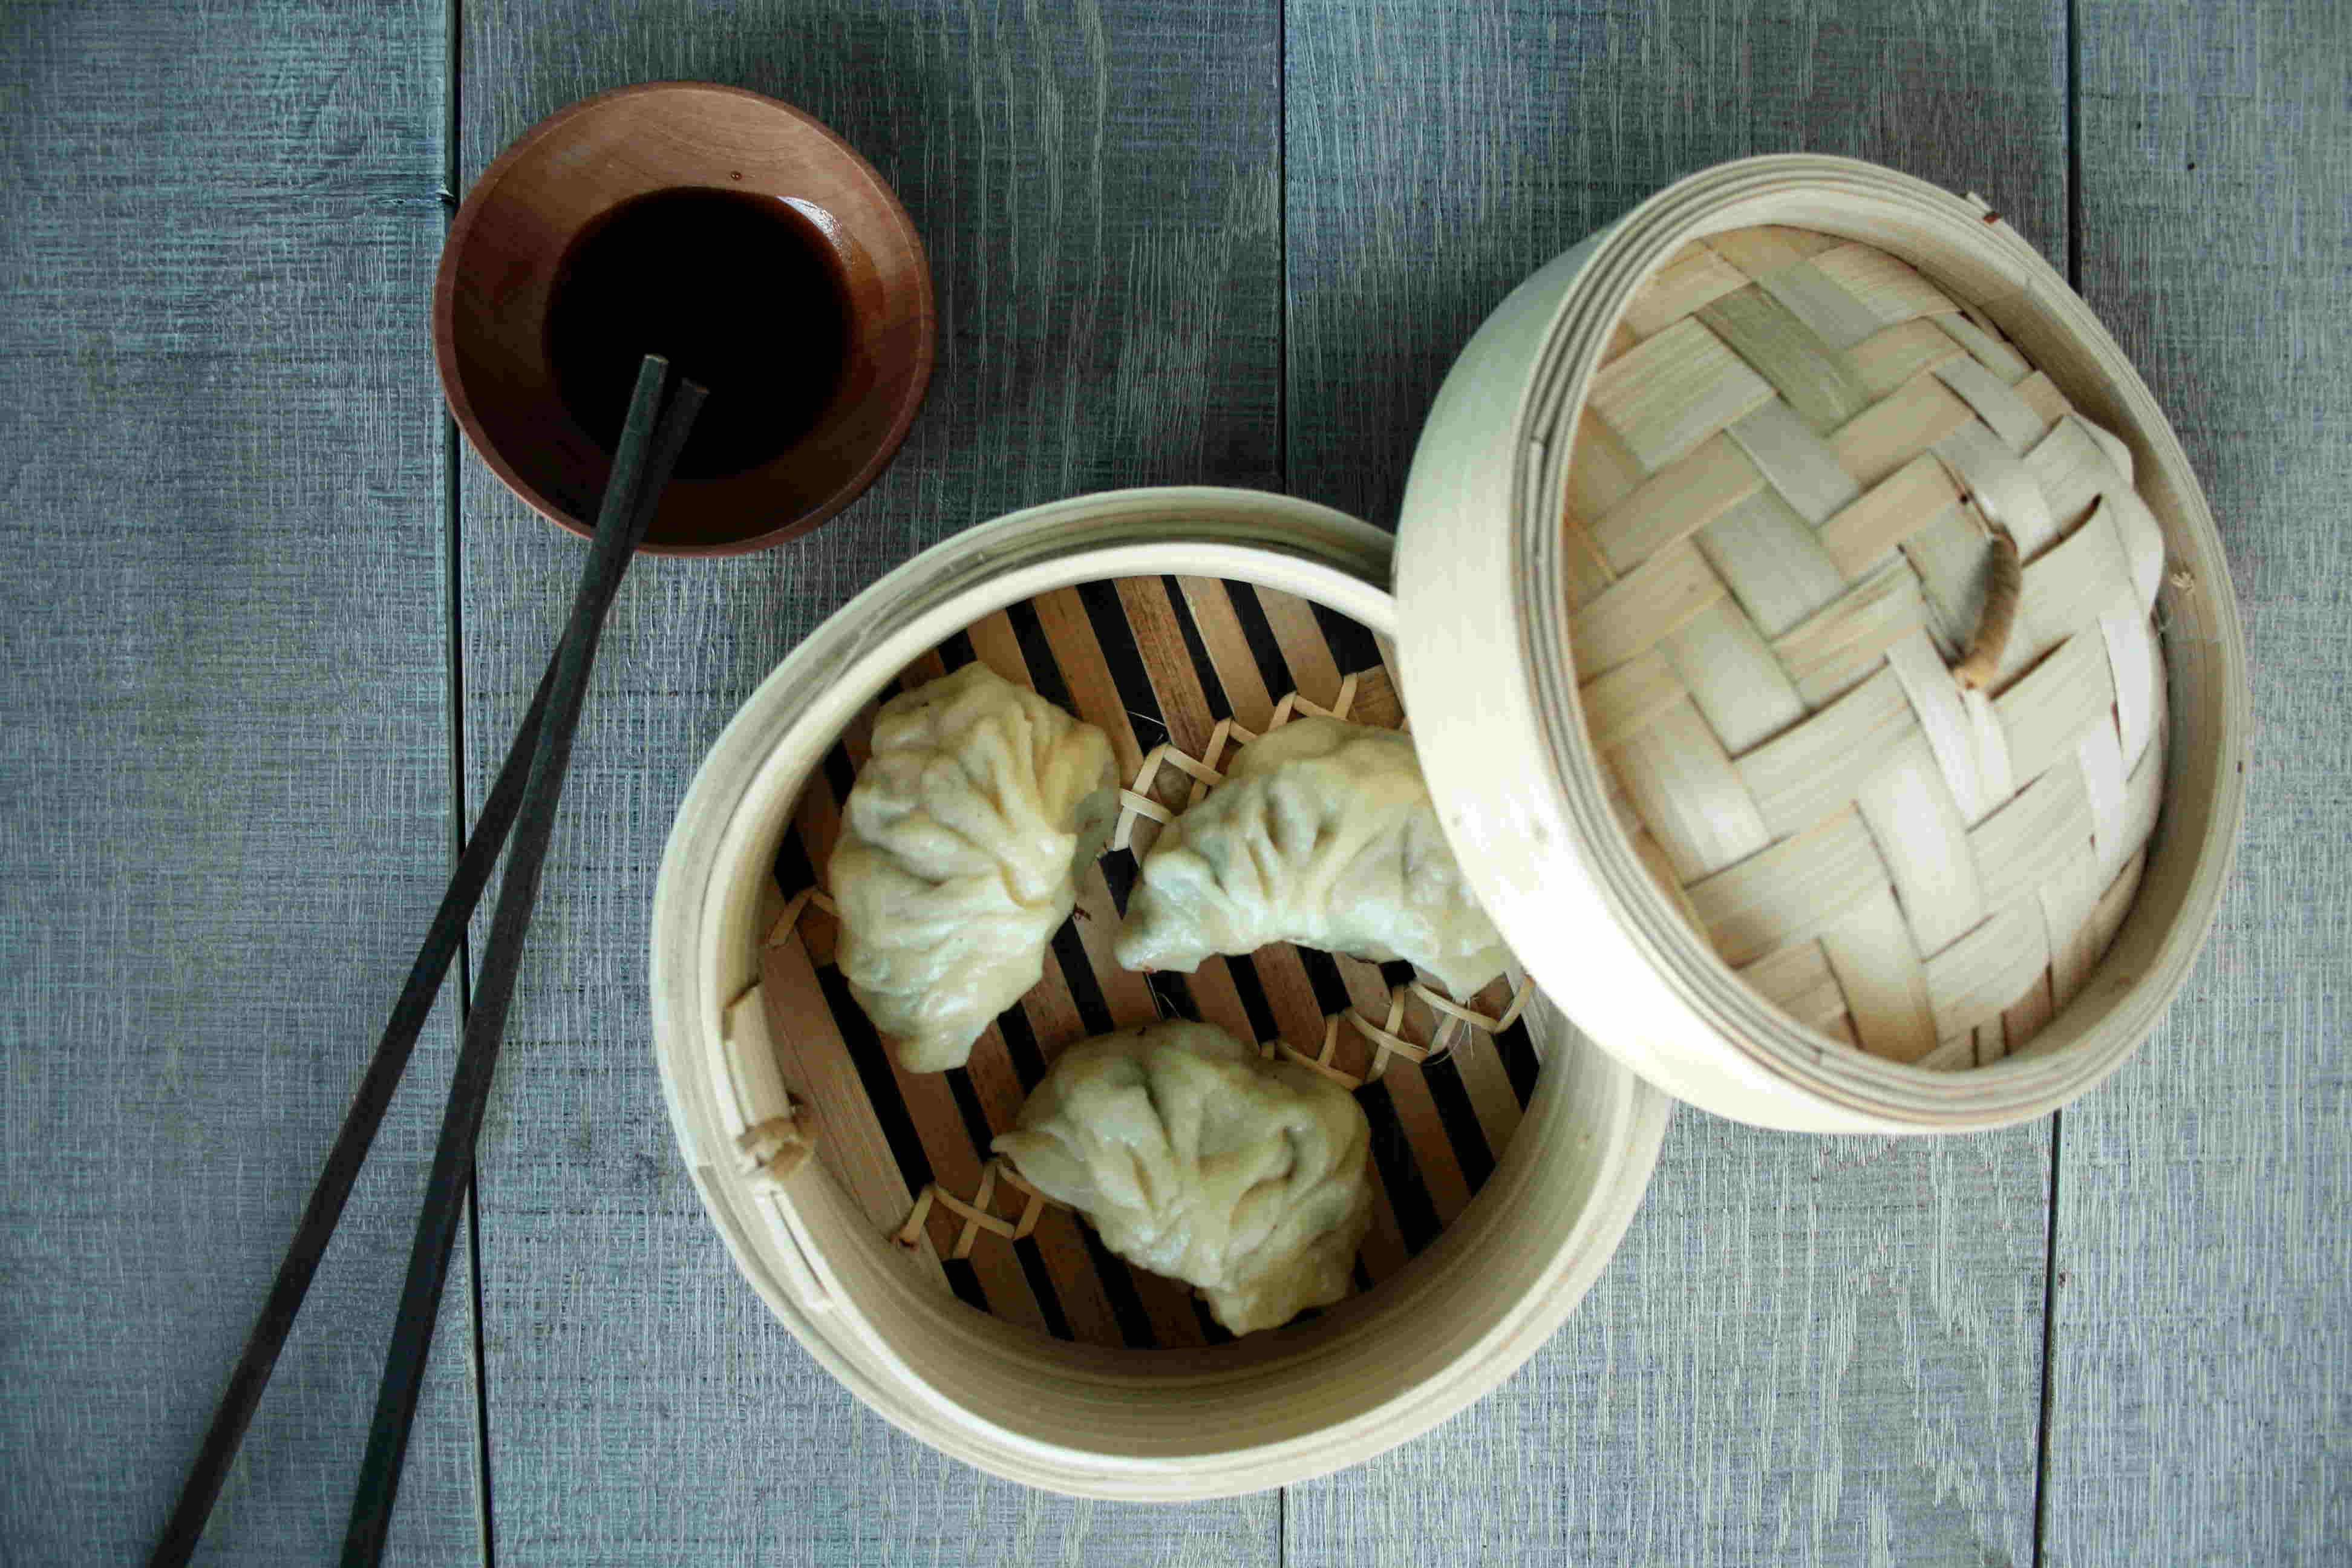 Steamed cooking jiaozi